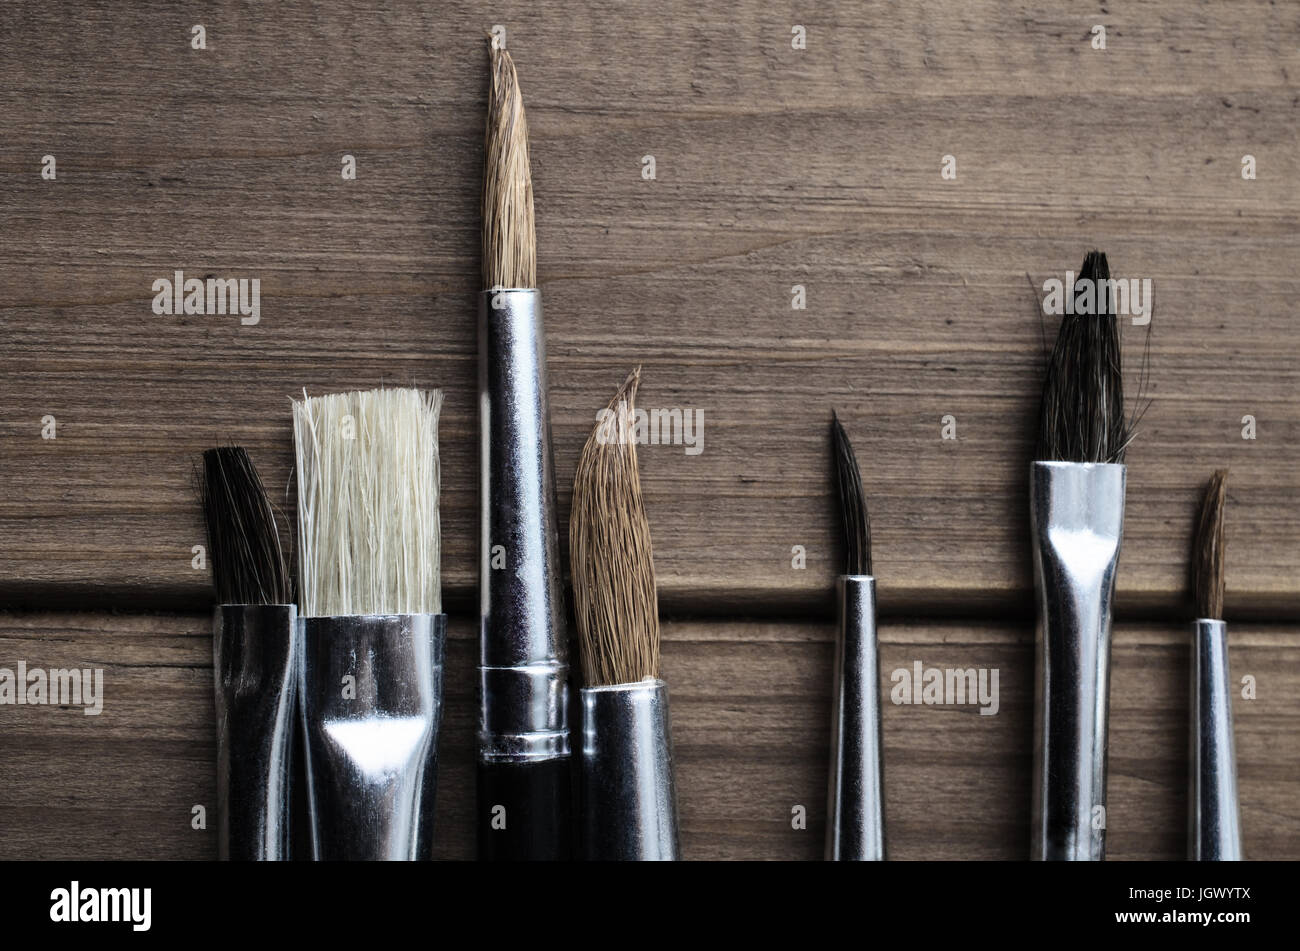 Overhead photograph of a variety of artist's paintbrushes arranged on old, faded wood. Stock Photo